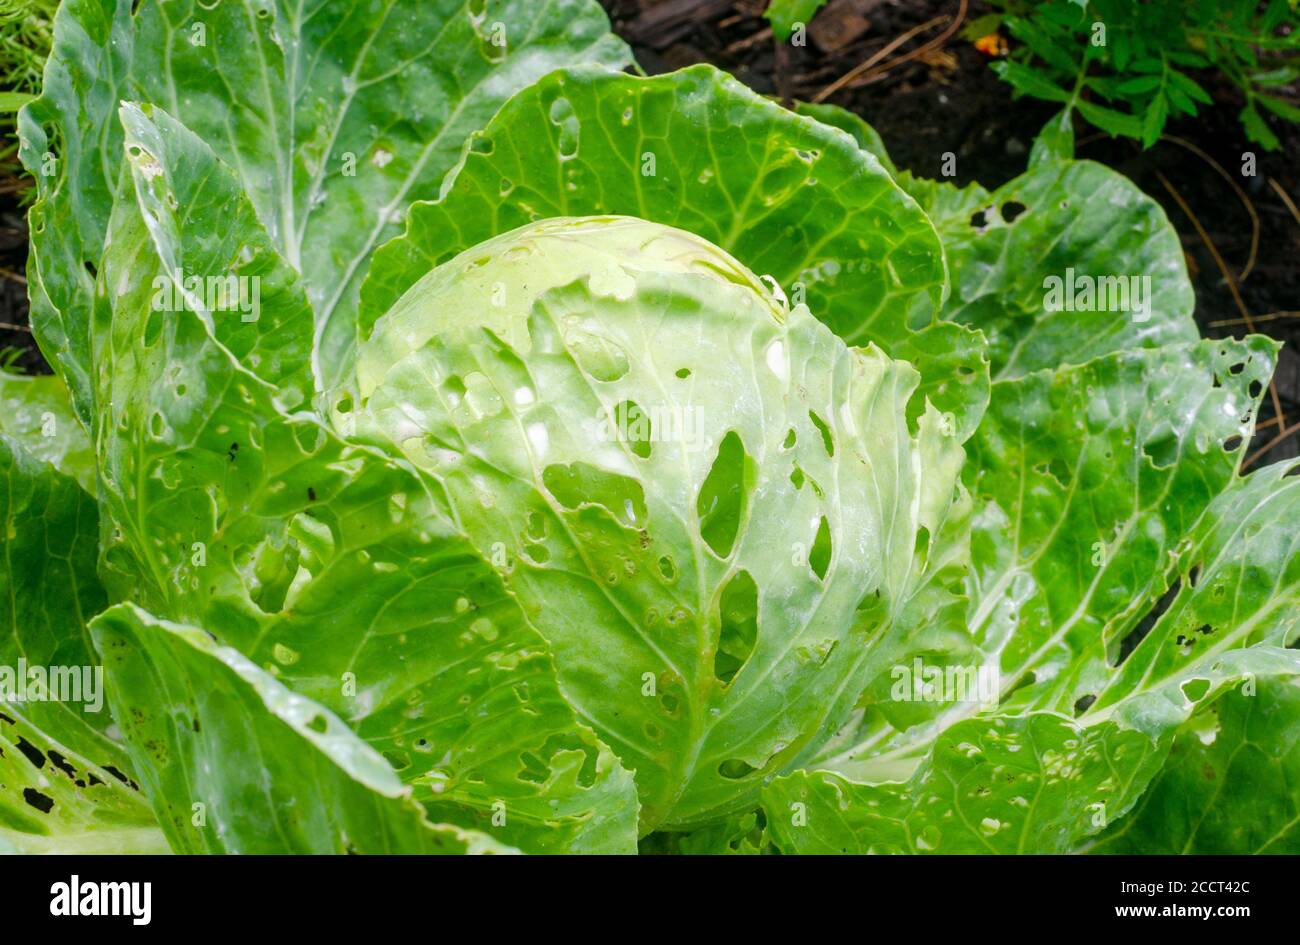 Cabbage head in garden close-up showing cabbage looper & other insect pest damage of holes eaten in leaves while grown using organic methods Stock Photo